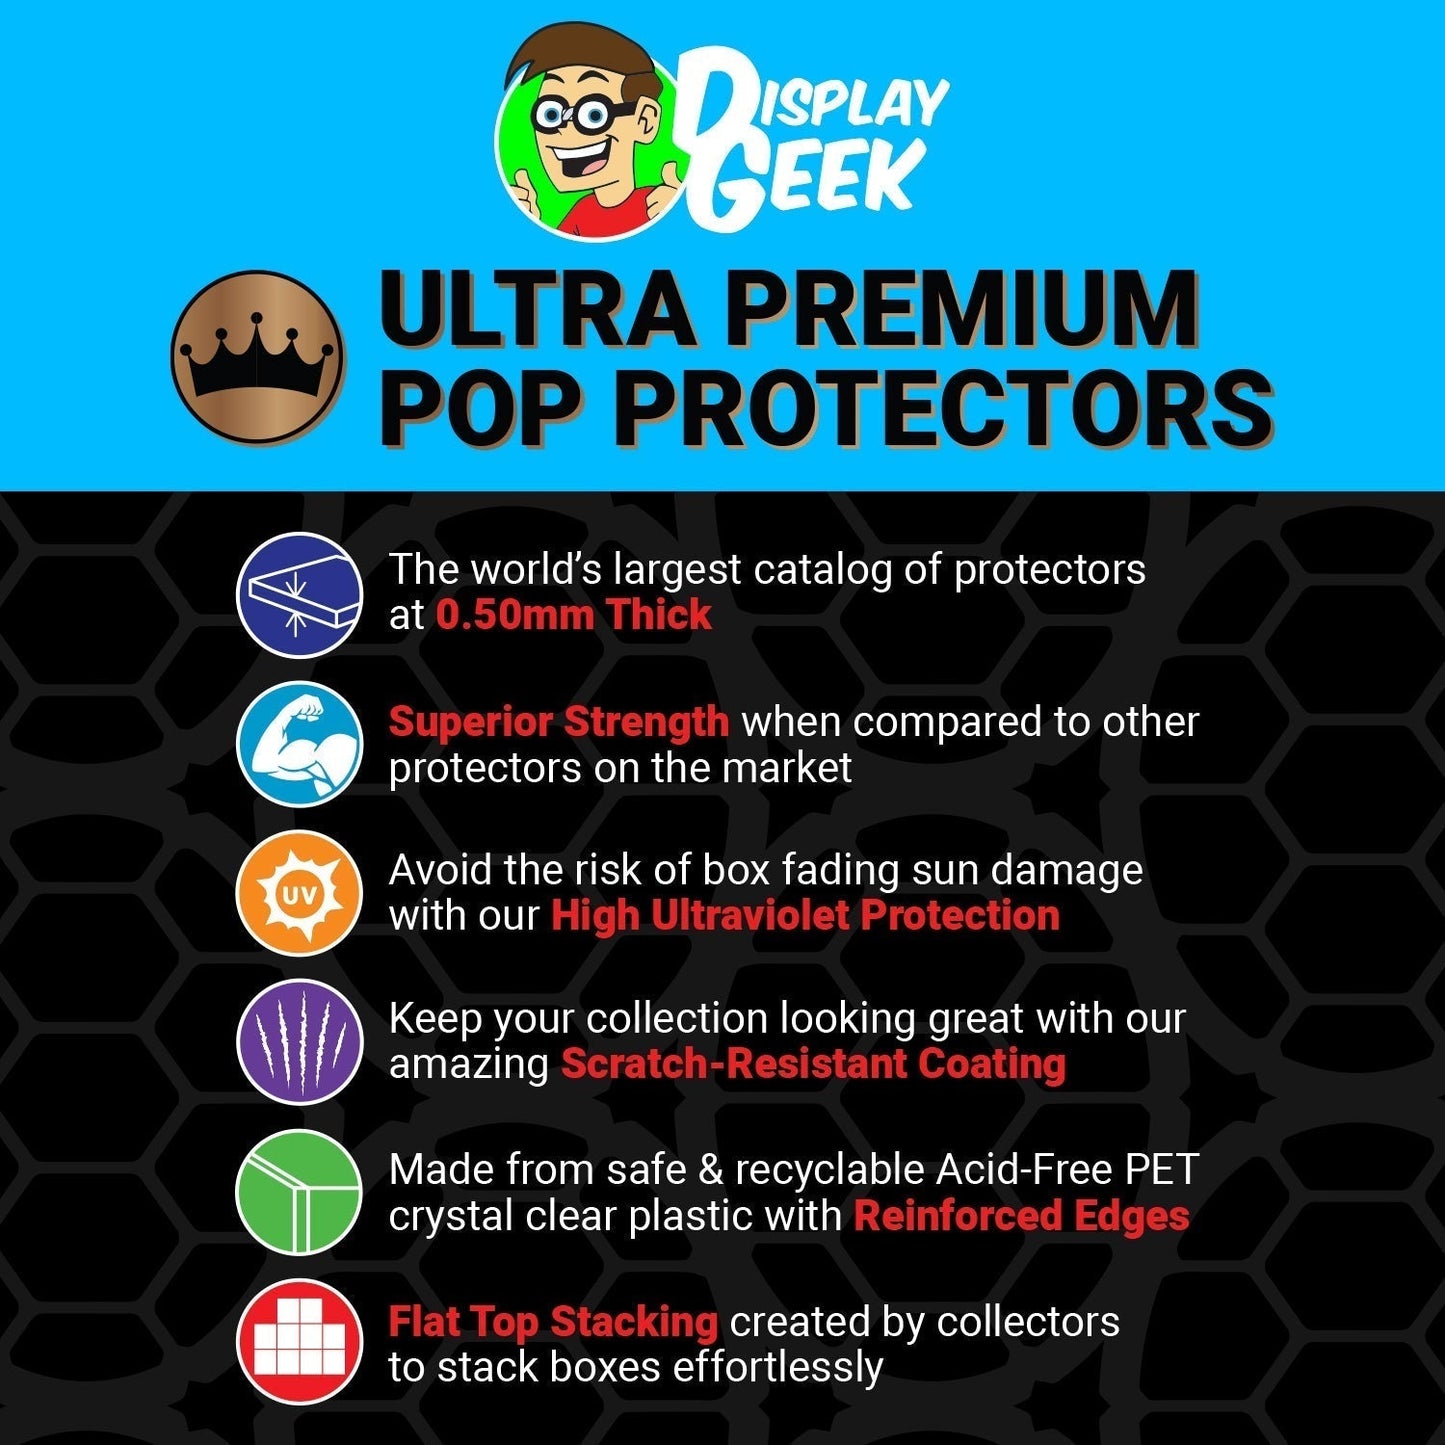 Pop Protector for 2 Pack Billy & Karen SDCC Funko Pop - PPG Pop Protector Guide Search Created by Display Geek